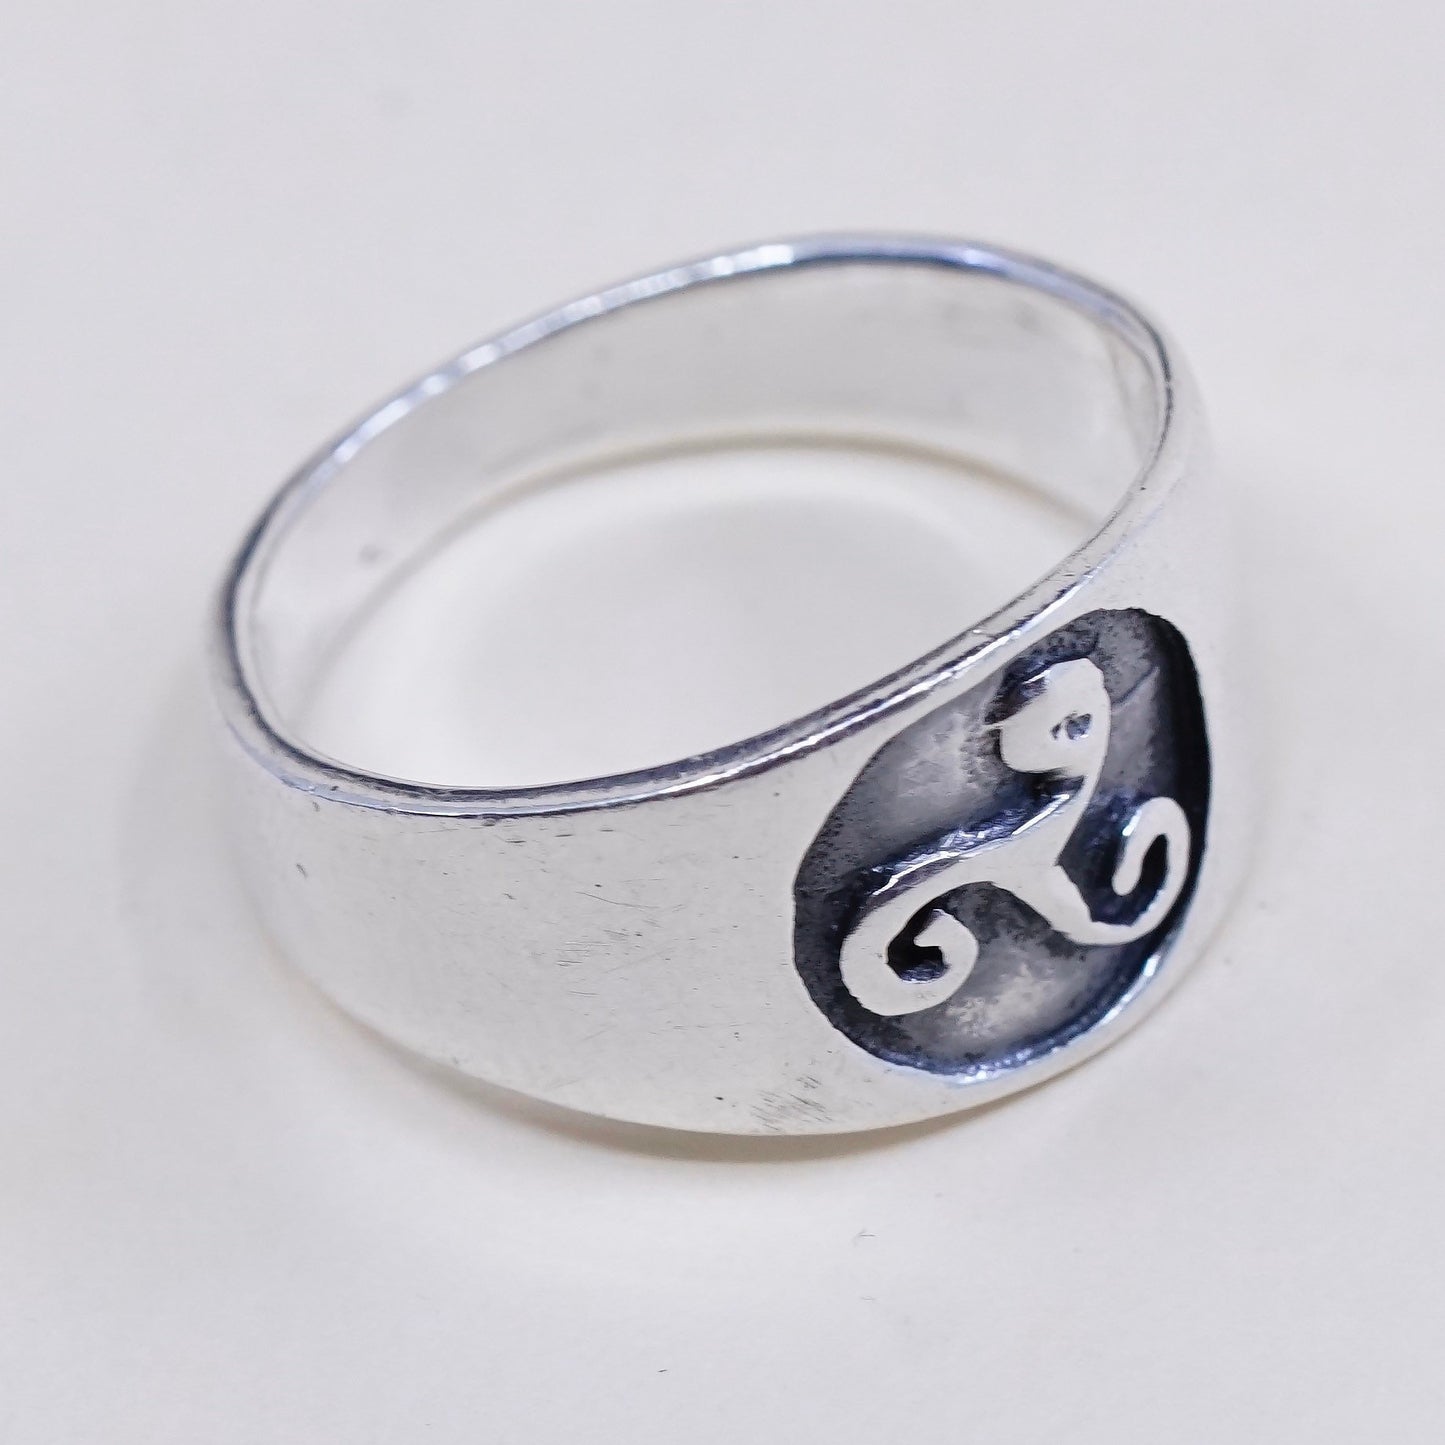 Size 7, vintage mexico sterling 925 silver handmade ring embossed swirl